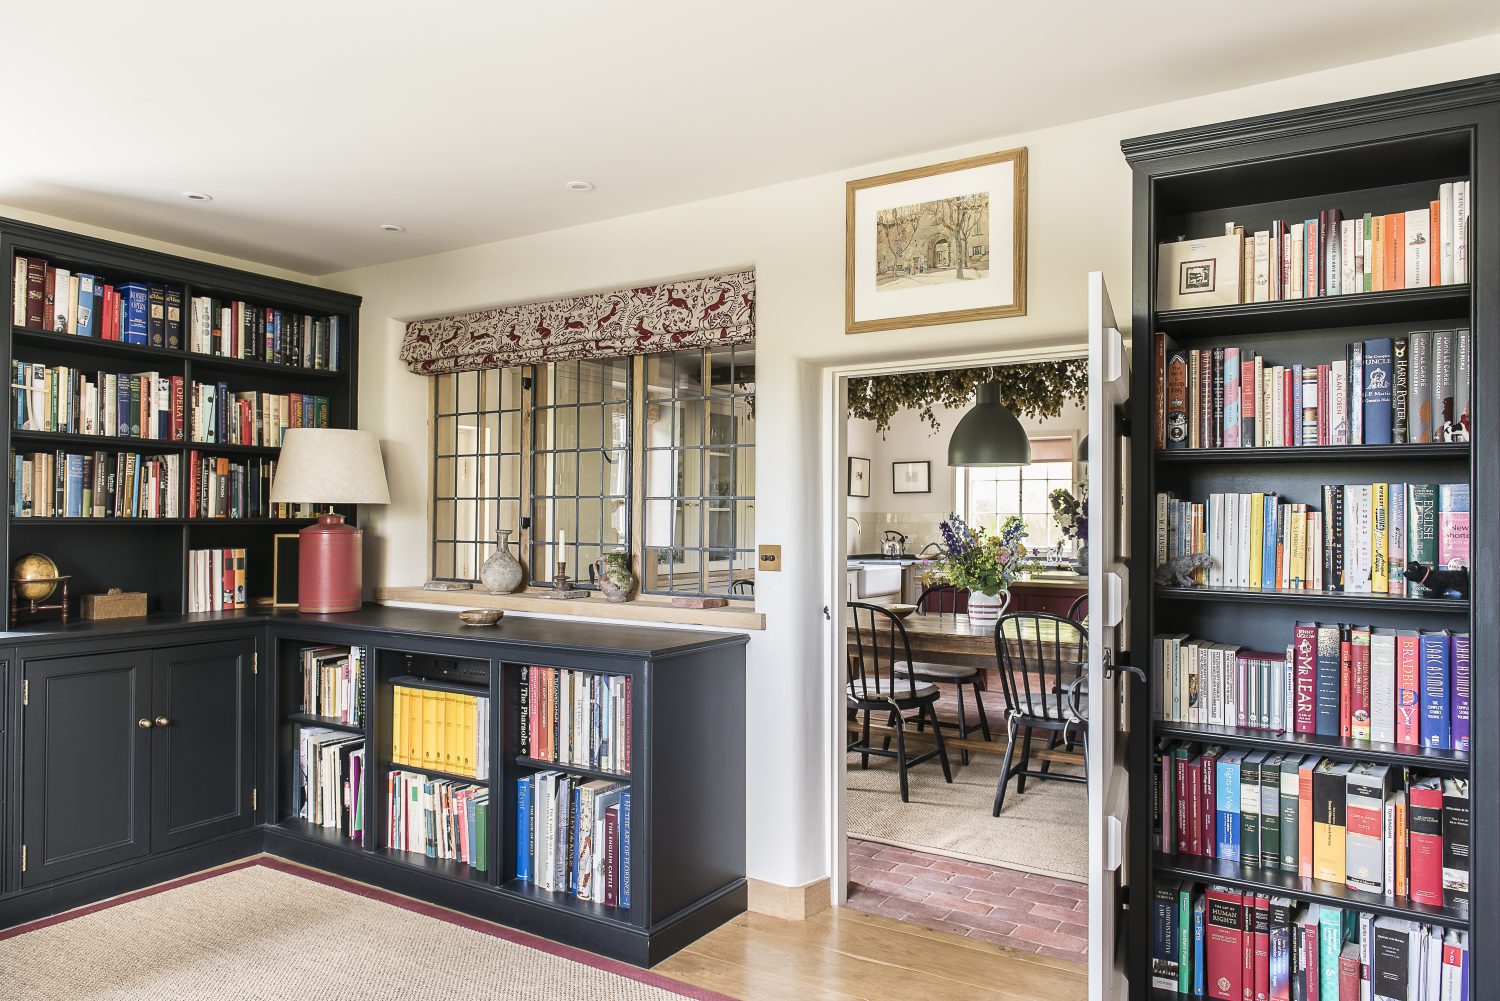 The book-lined study leads into the kitchen. The blind fabric was designed by Lindsay Alker